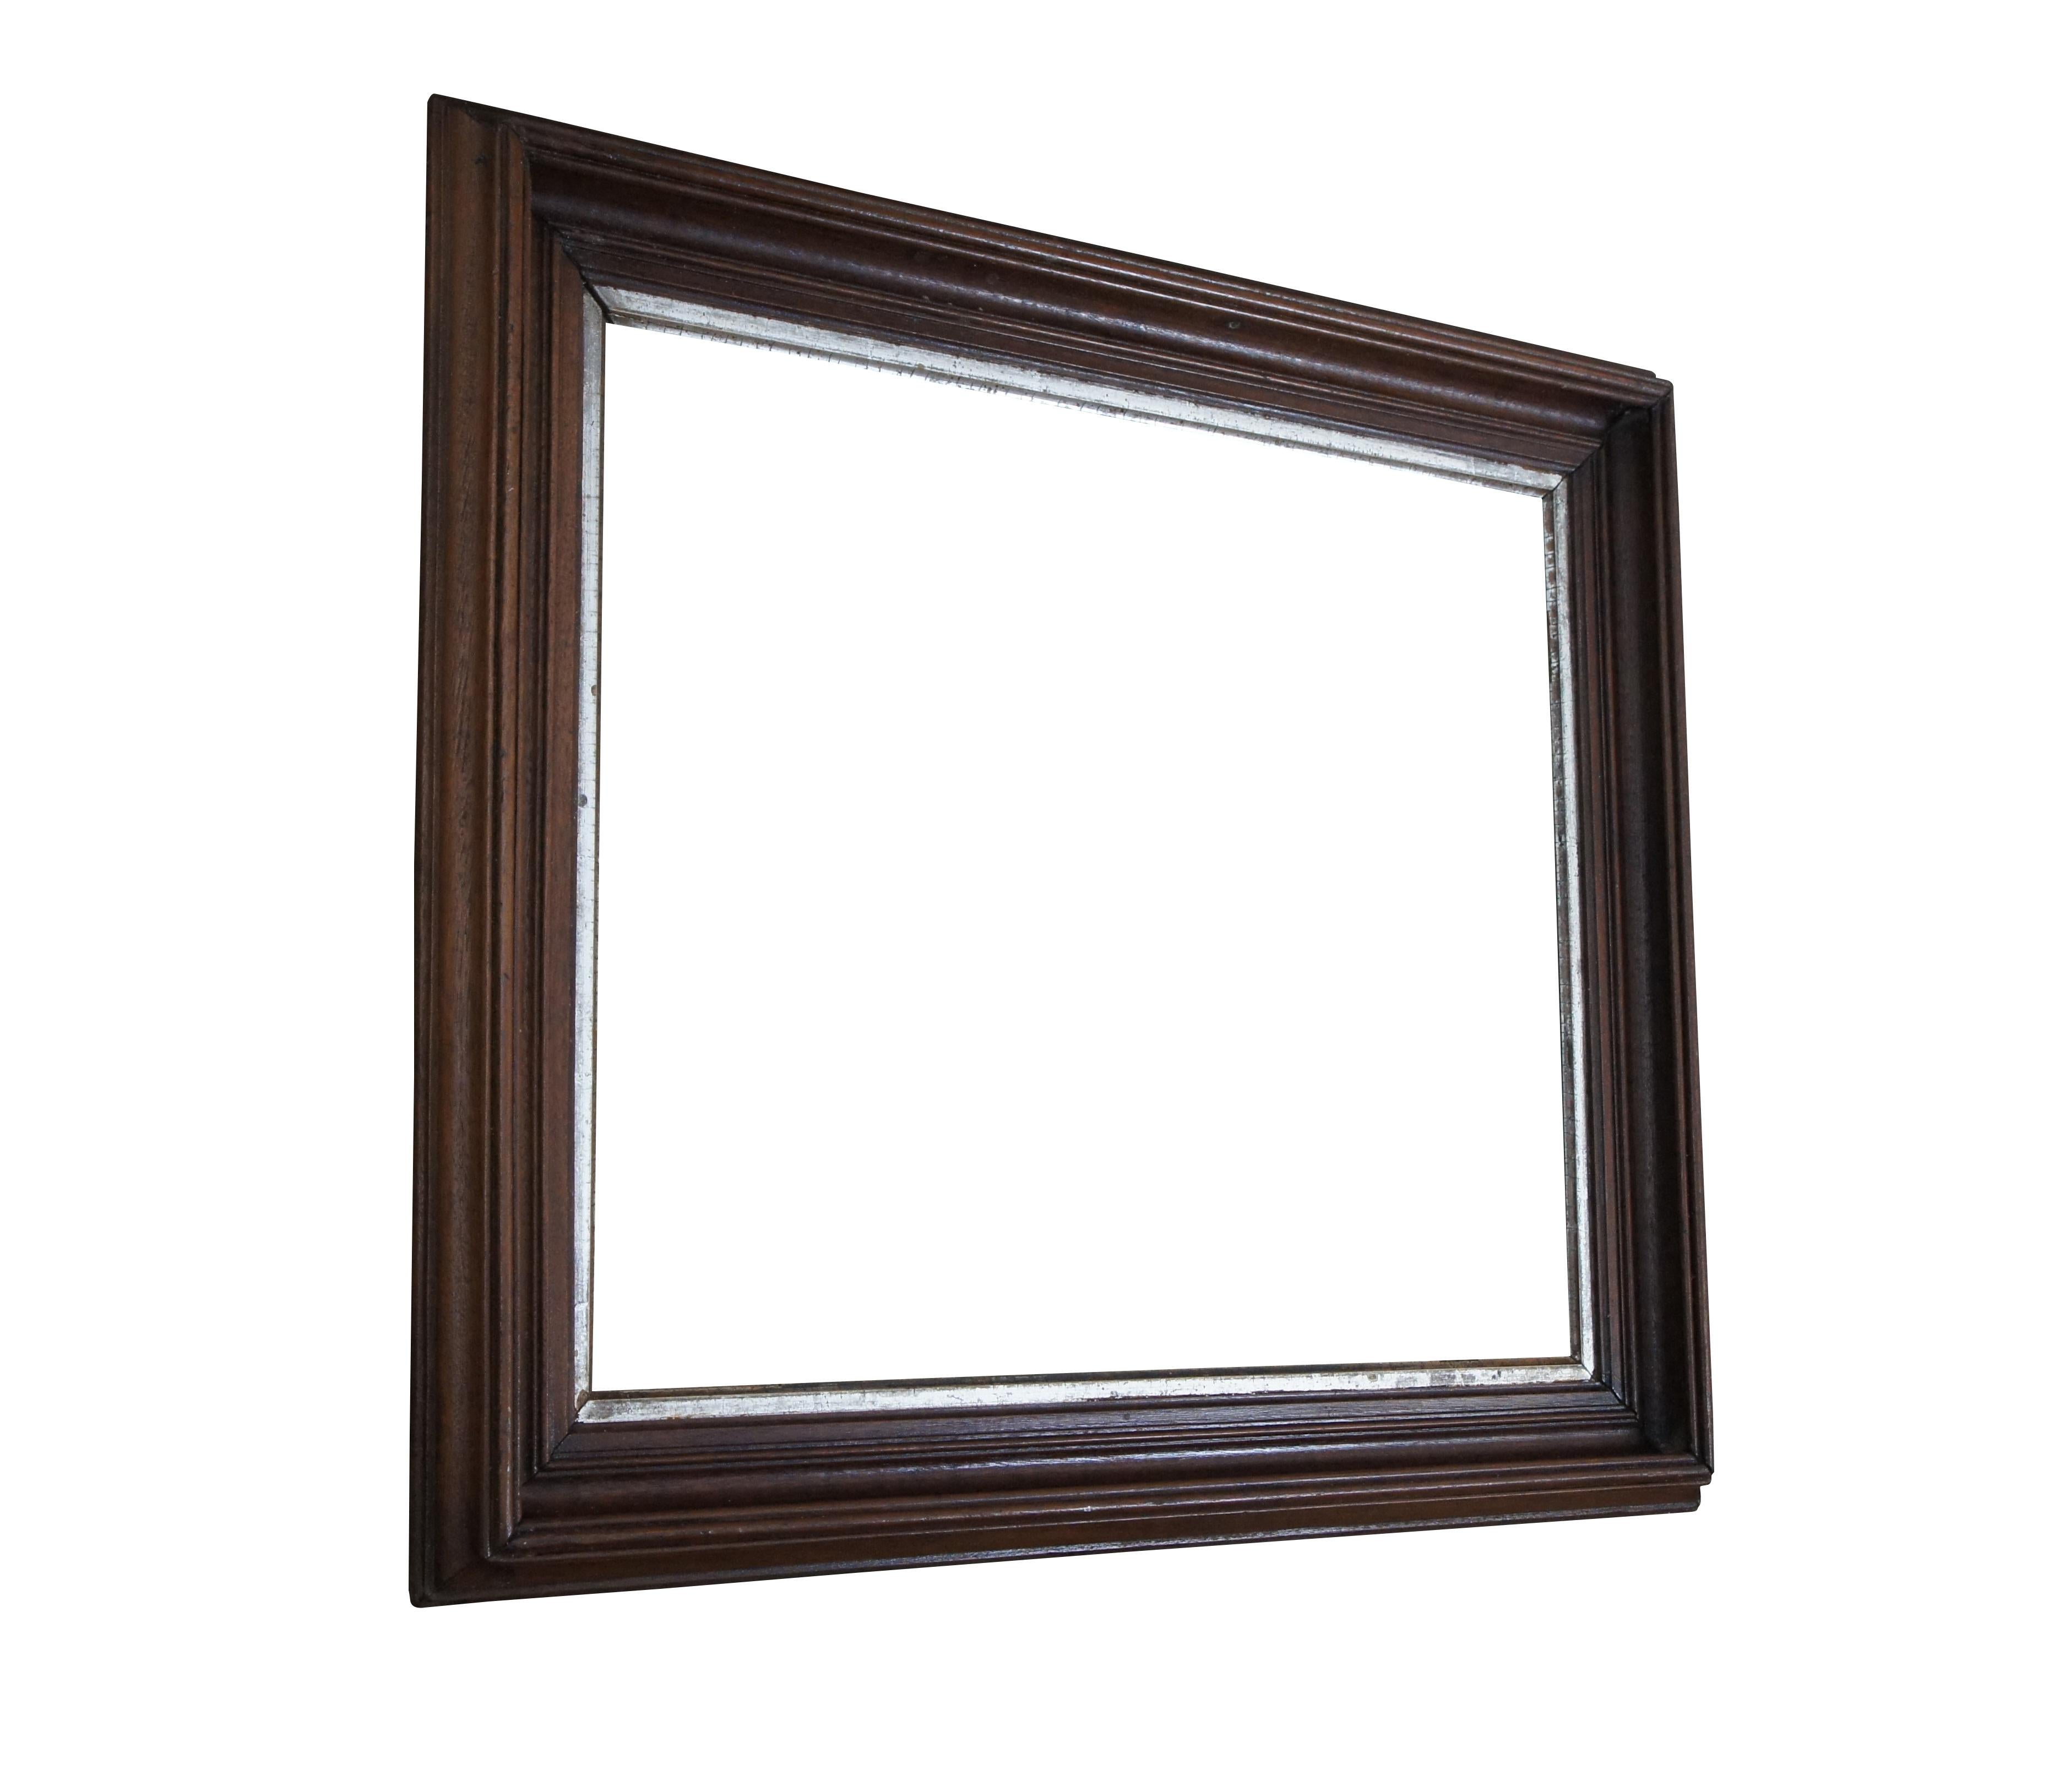 Rectangular wooden mirror / picture frame with carved bevel and silver gilt trim along the inner edge. Made from mahogany.

Dimensions:
27.5